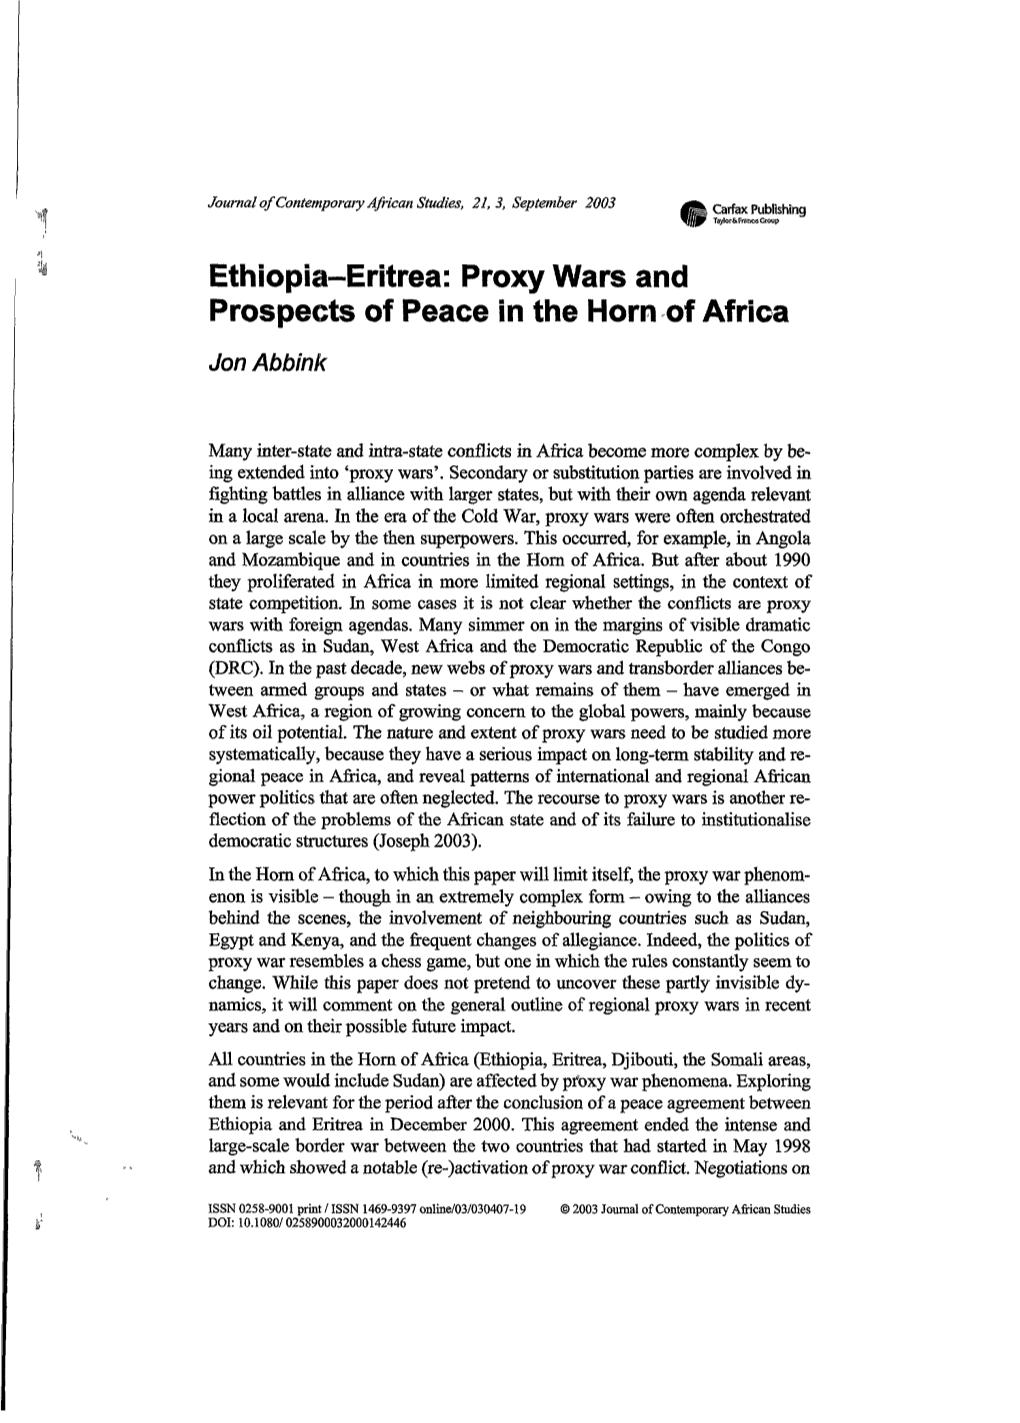 Proxy Wars and Prospects of Peace in the Horn of Africa Jon Abbink